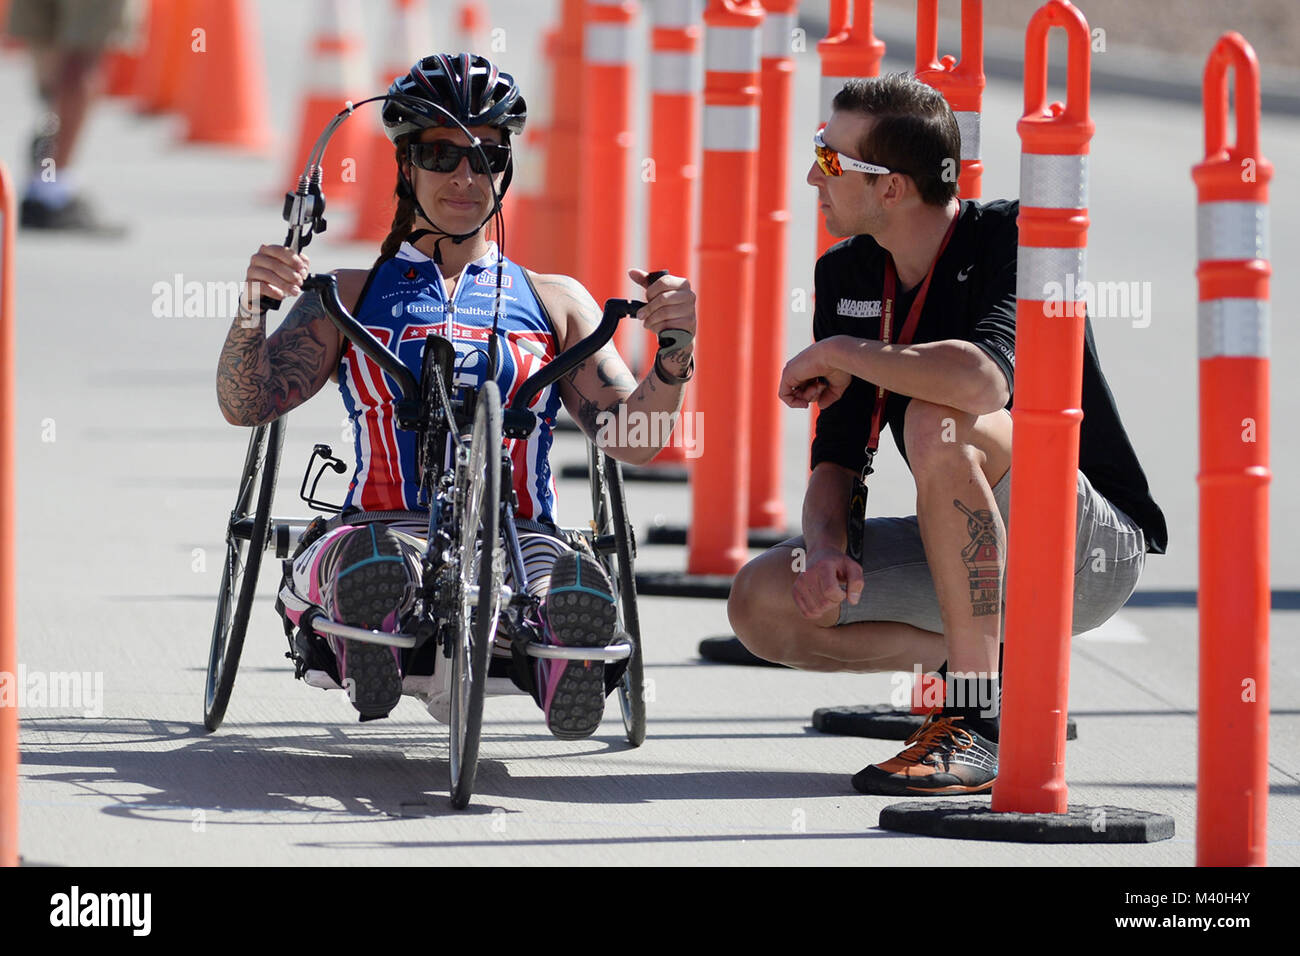 Army Staff Sgt. Monica Martinez awaits the starting call for her victory ride in the women’s hand cycle event  during the Army Trials  for the 2015 Department of Defense Warrior Games March 29, 2015 at Fort Bliss in El Paso, Texas. (DoD News photo by EJ Hersom) 150329-D-DB155-004 by DoD News Photos Stock Photo